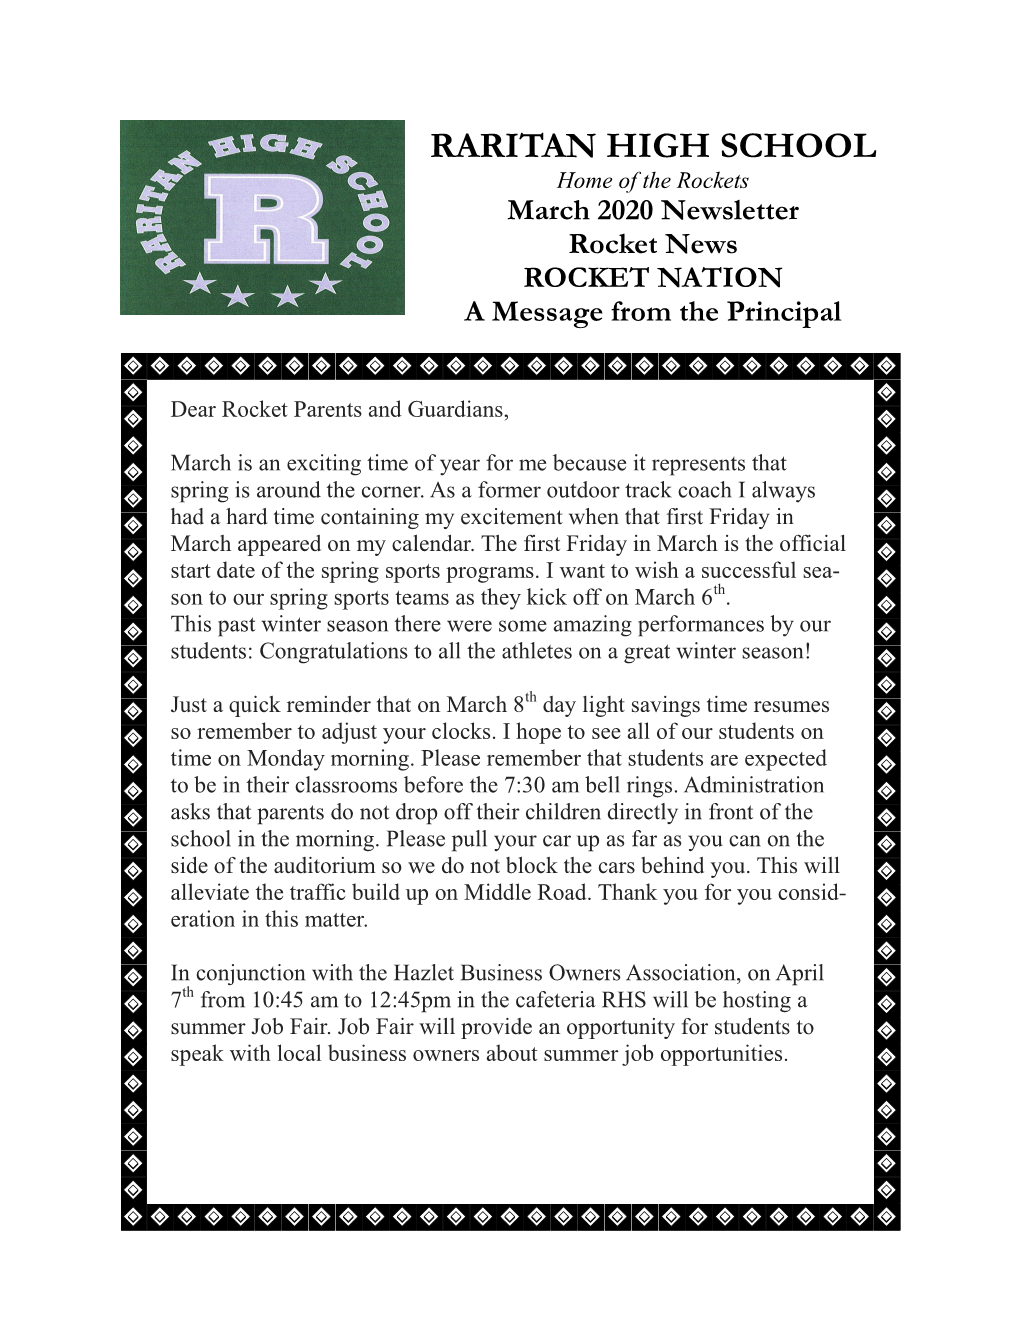 RARITAN HIGH SCHOOL Home of the Rockets March 2020 Newsletter Rocket News ROCKET NATION a Message from the Principal